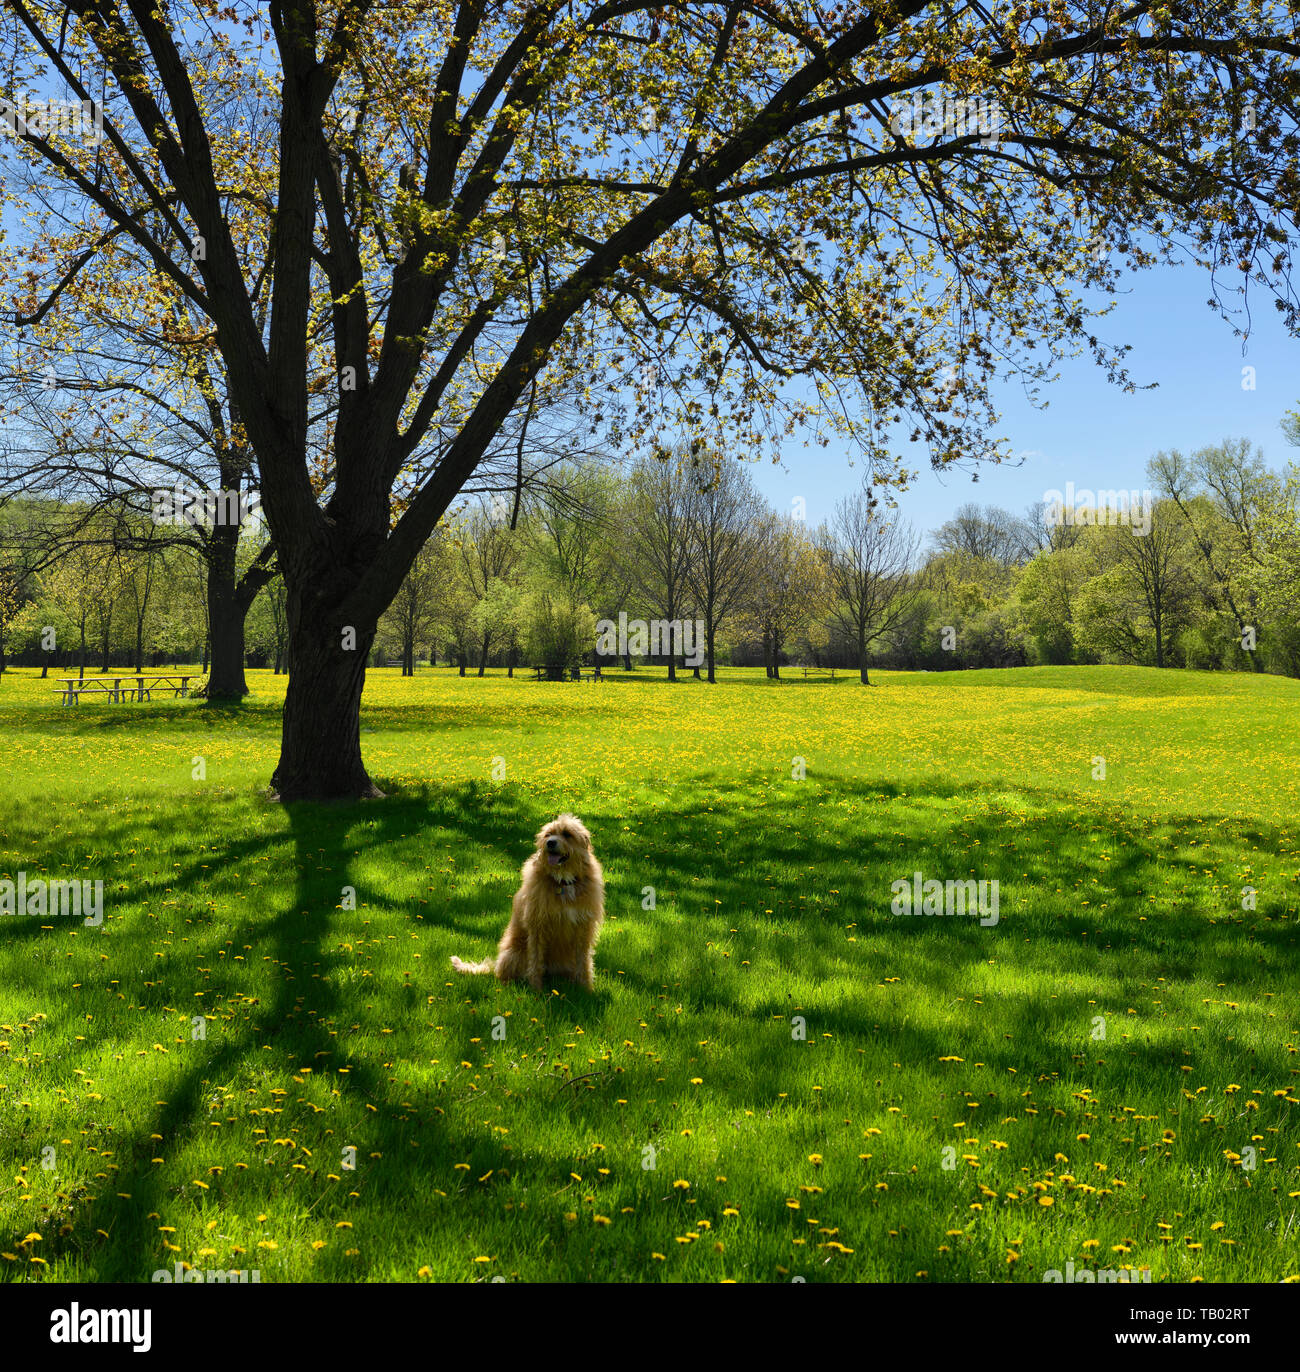 Golden bearded dog under a maple tree in Spring with green grass and yellow dandelion flowers in a Toronto Park Stock Photo